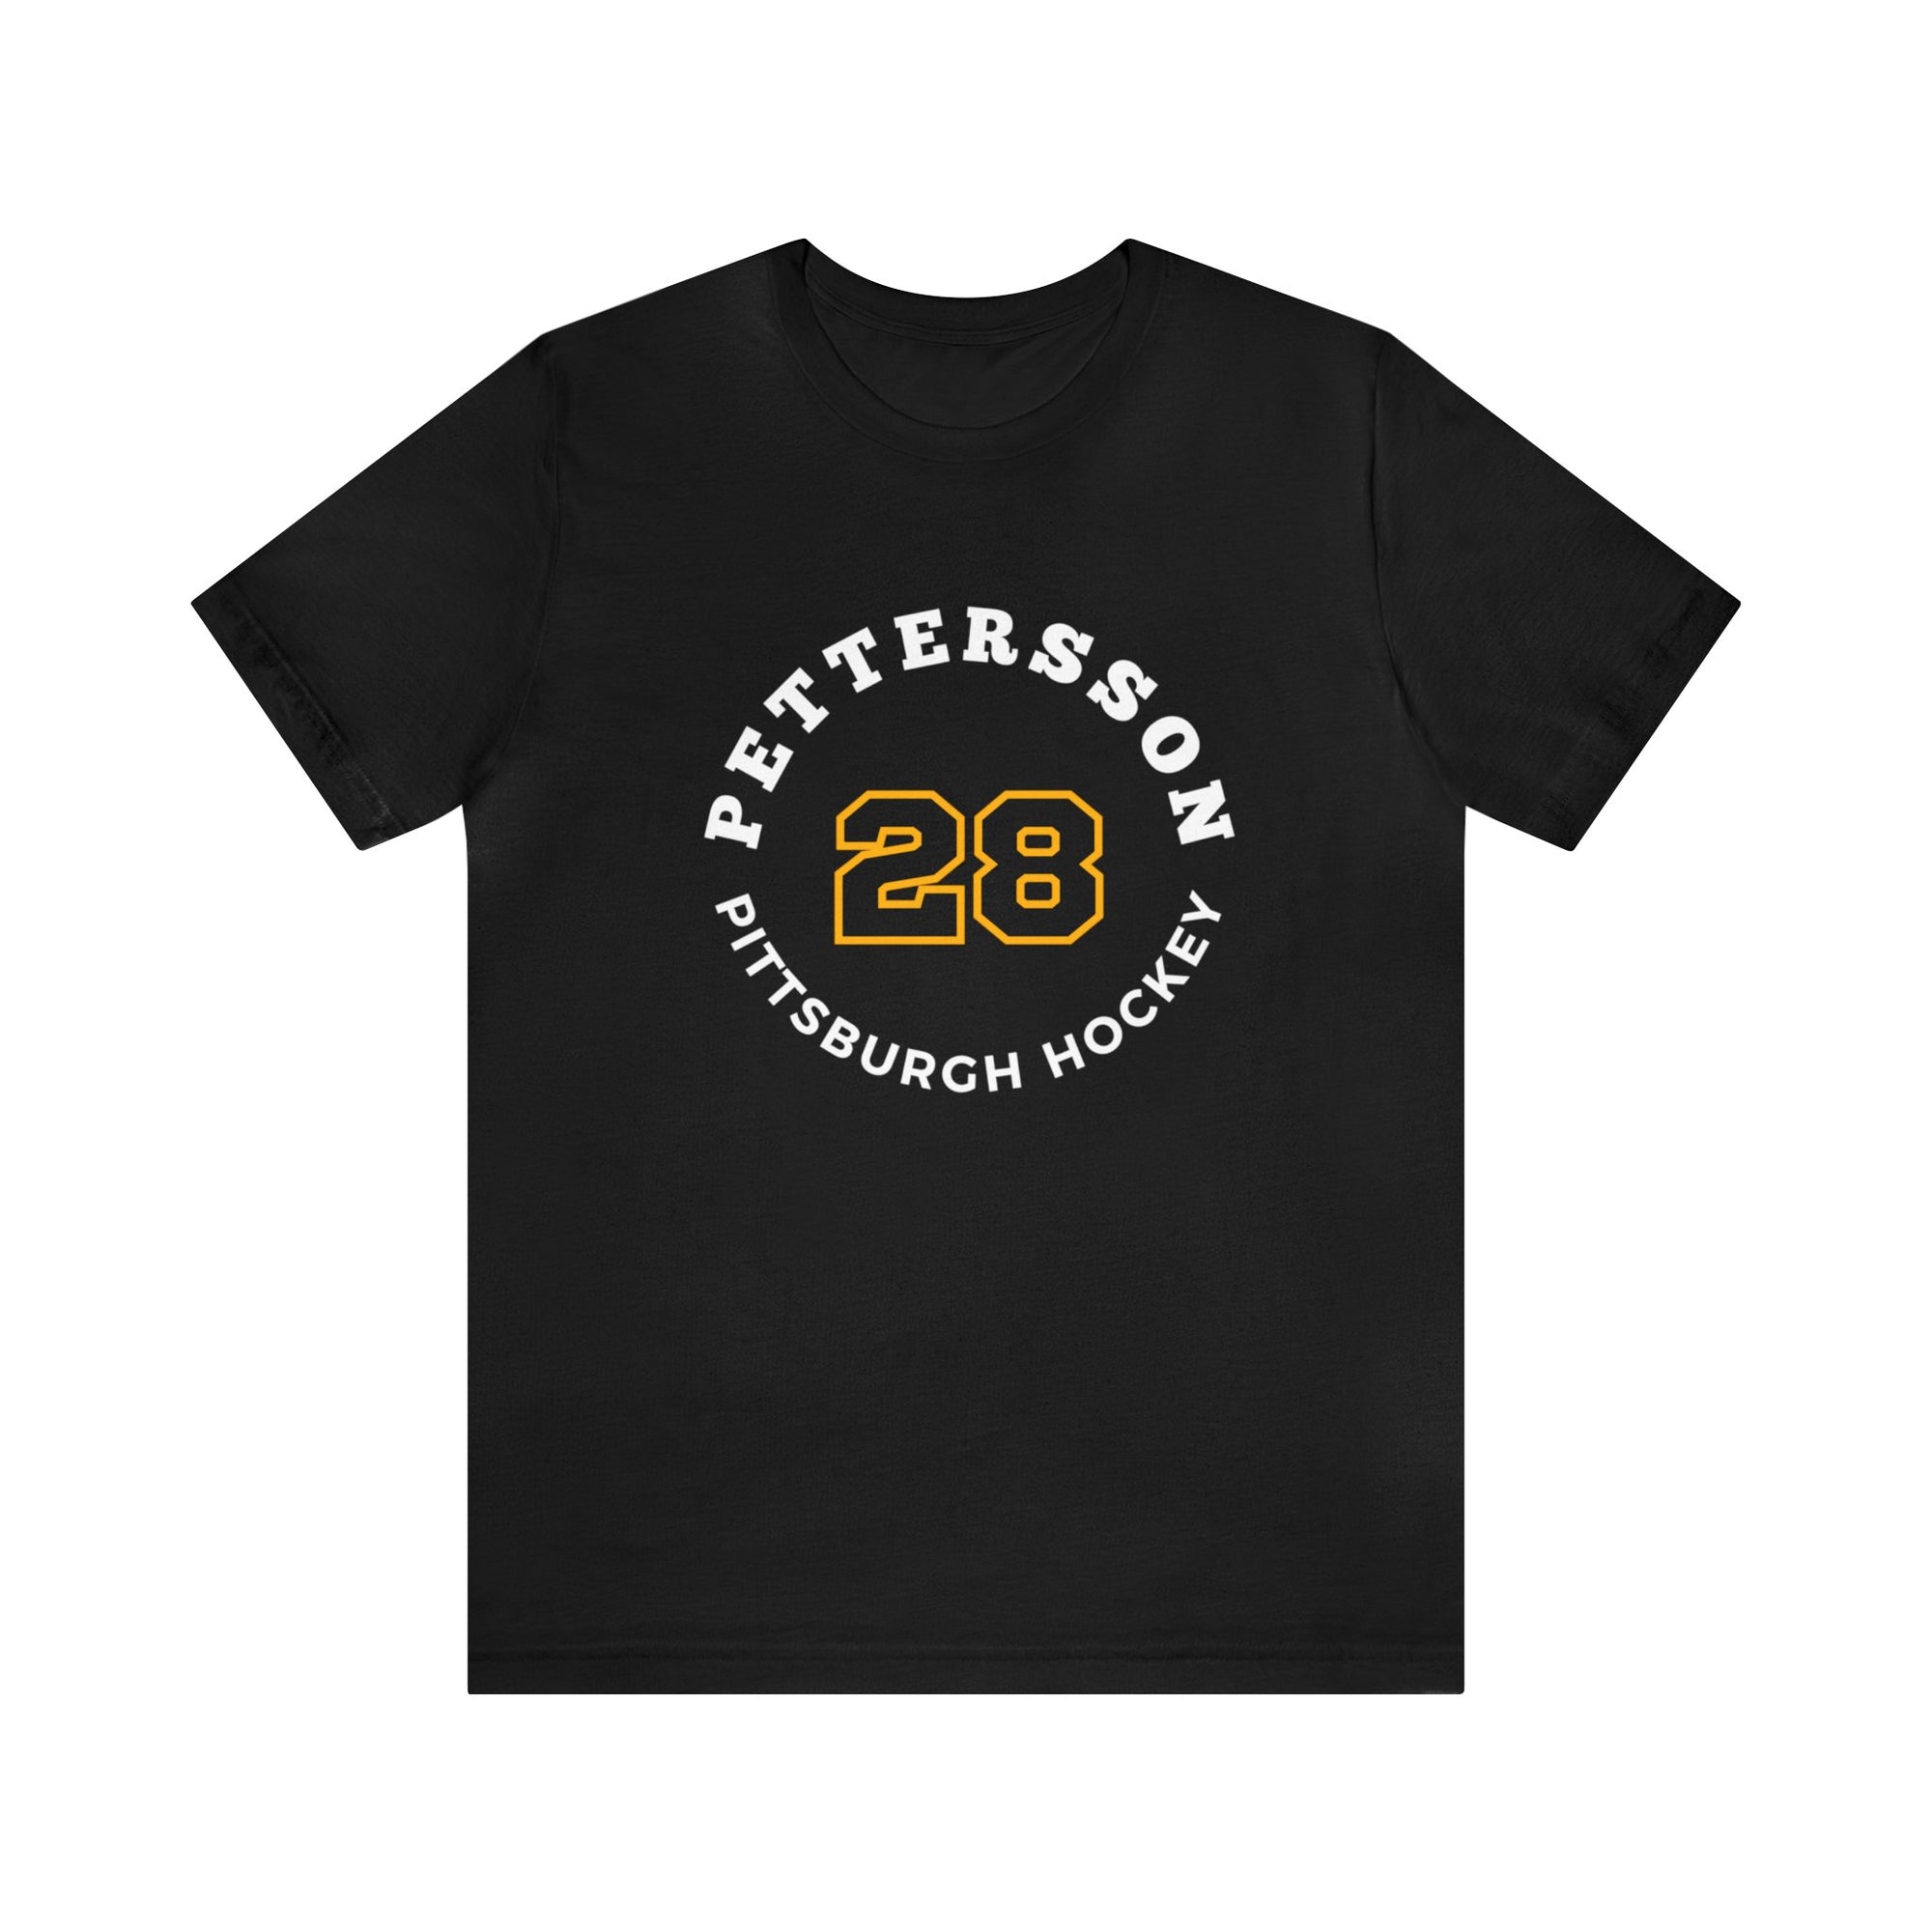 Pettersson 28 Pittsburgh Hockey Number Arch Design Unisex T-Shirt